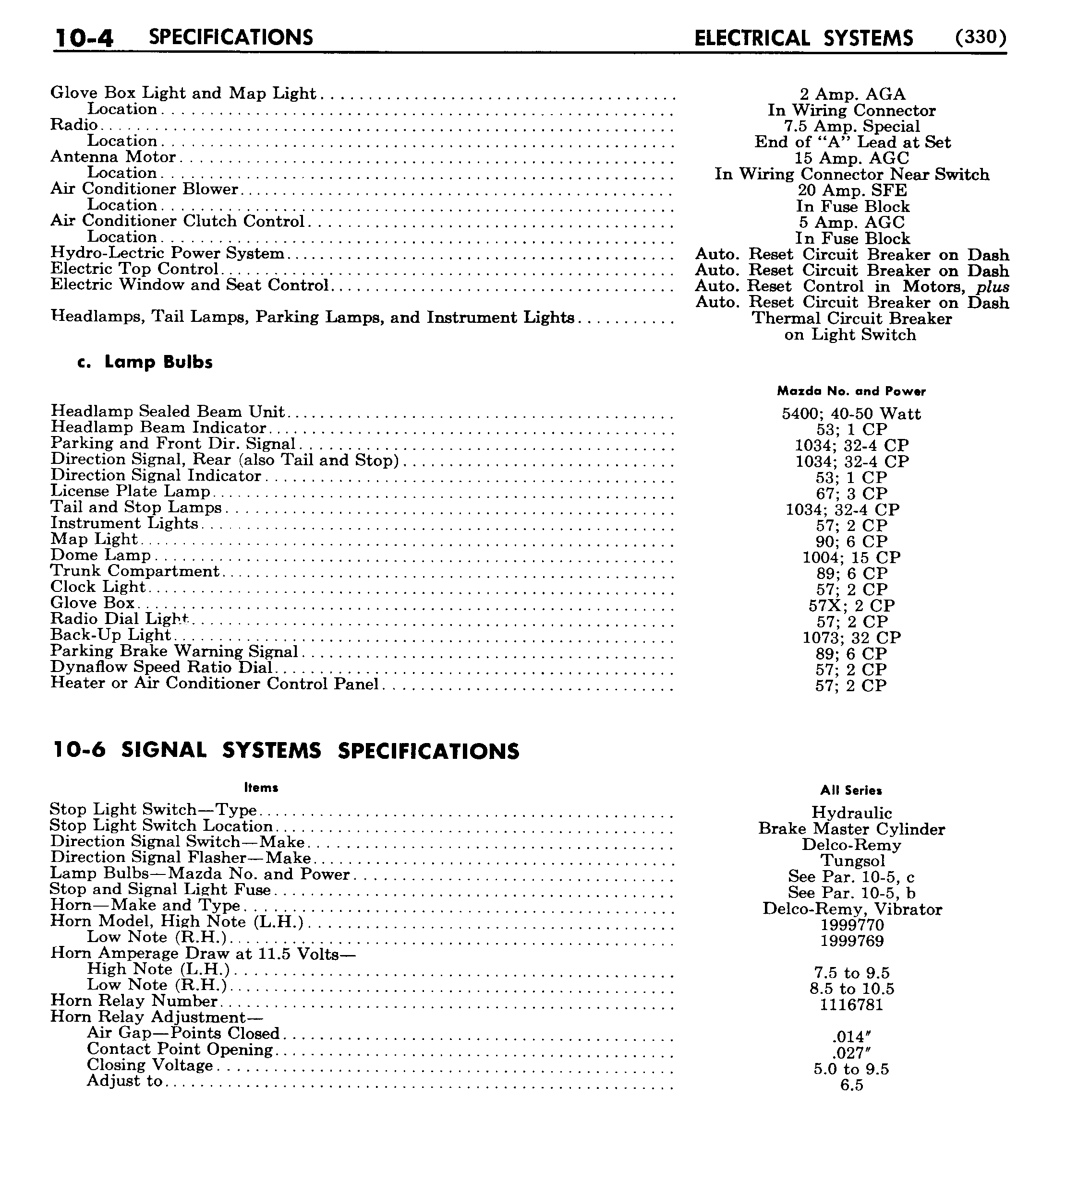 n_11 1956 Buick Shop Manual - Electrical Systems-004-004.jpg